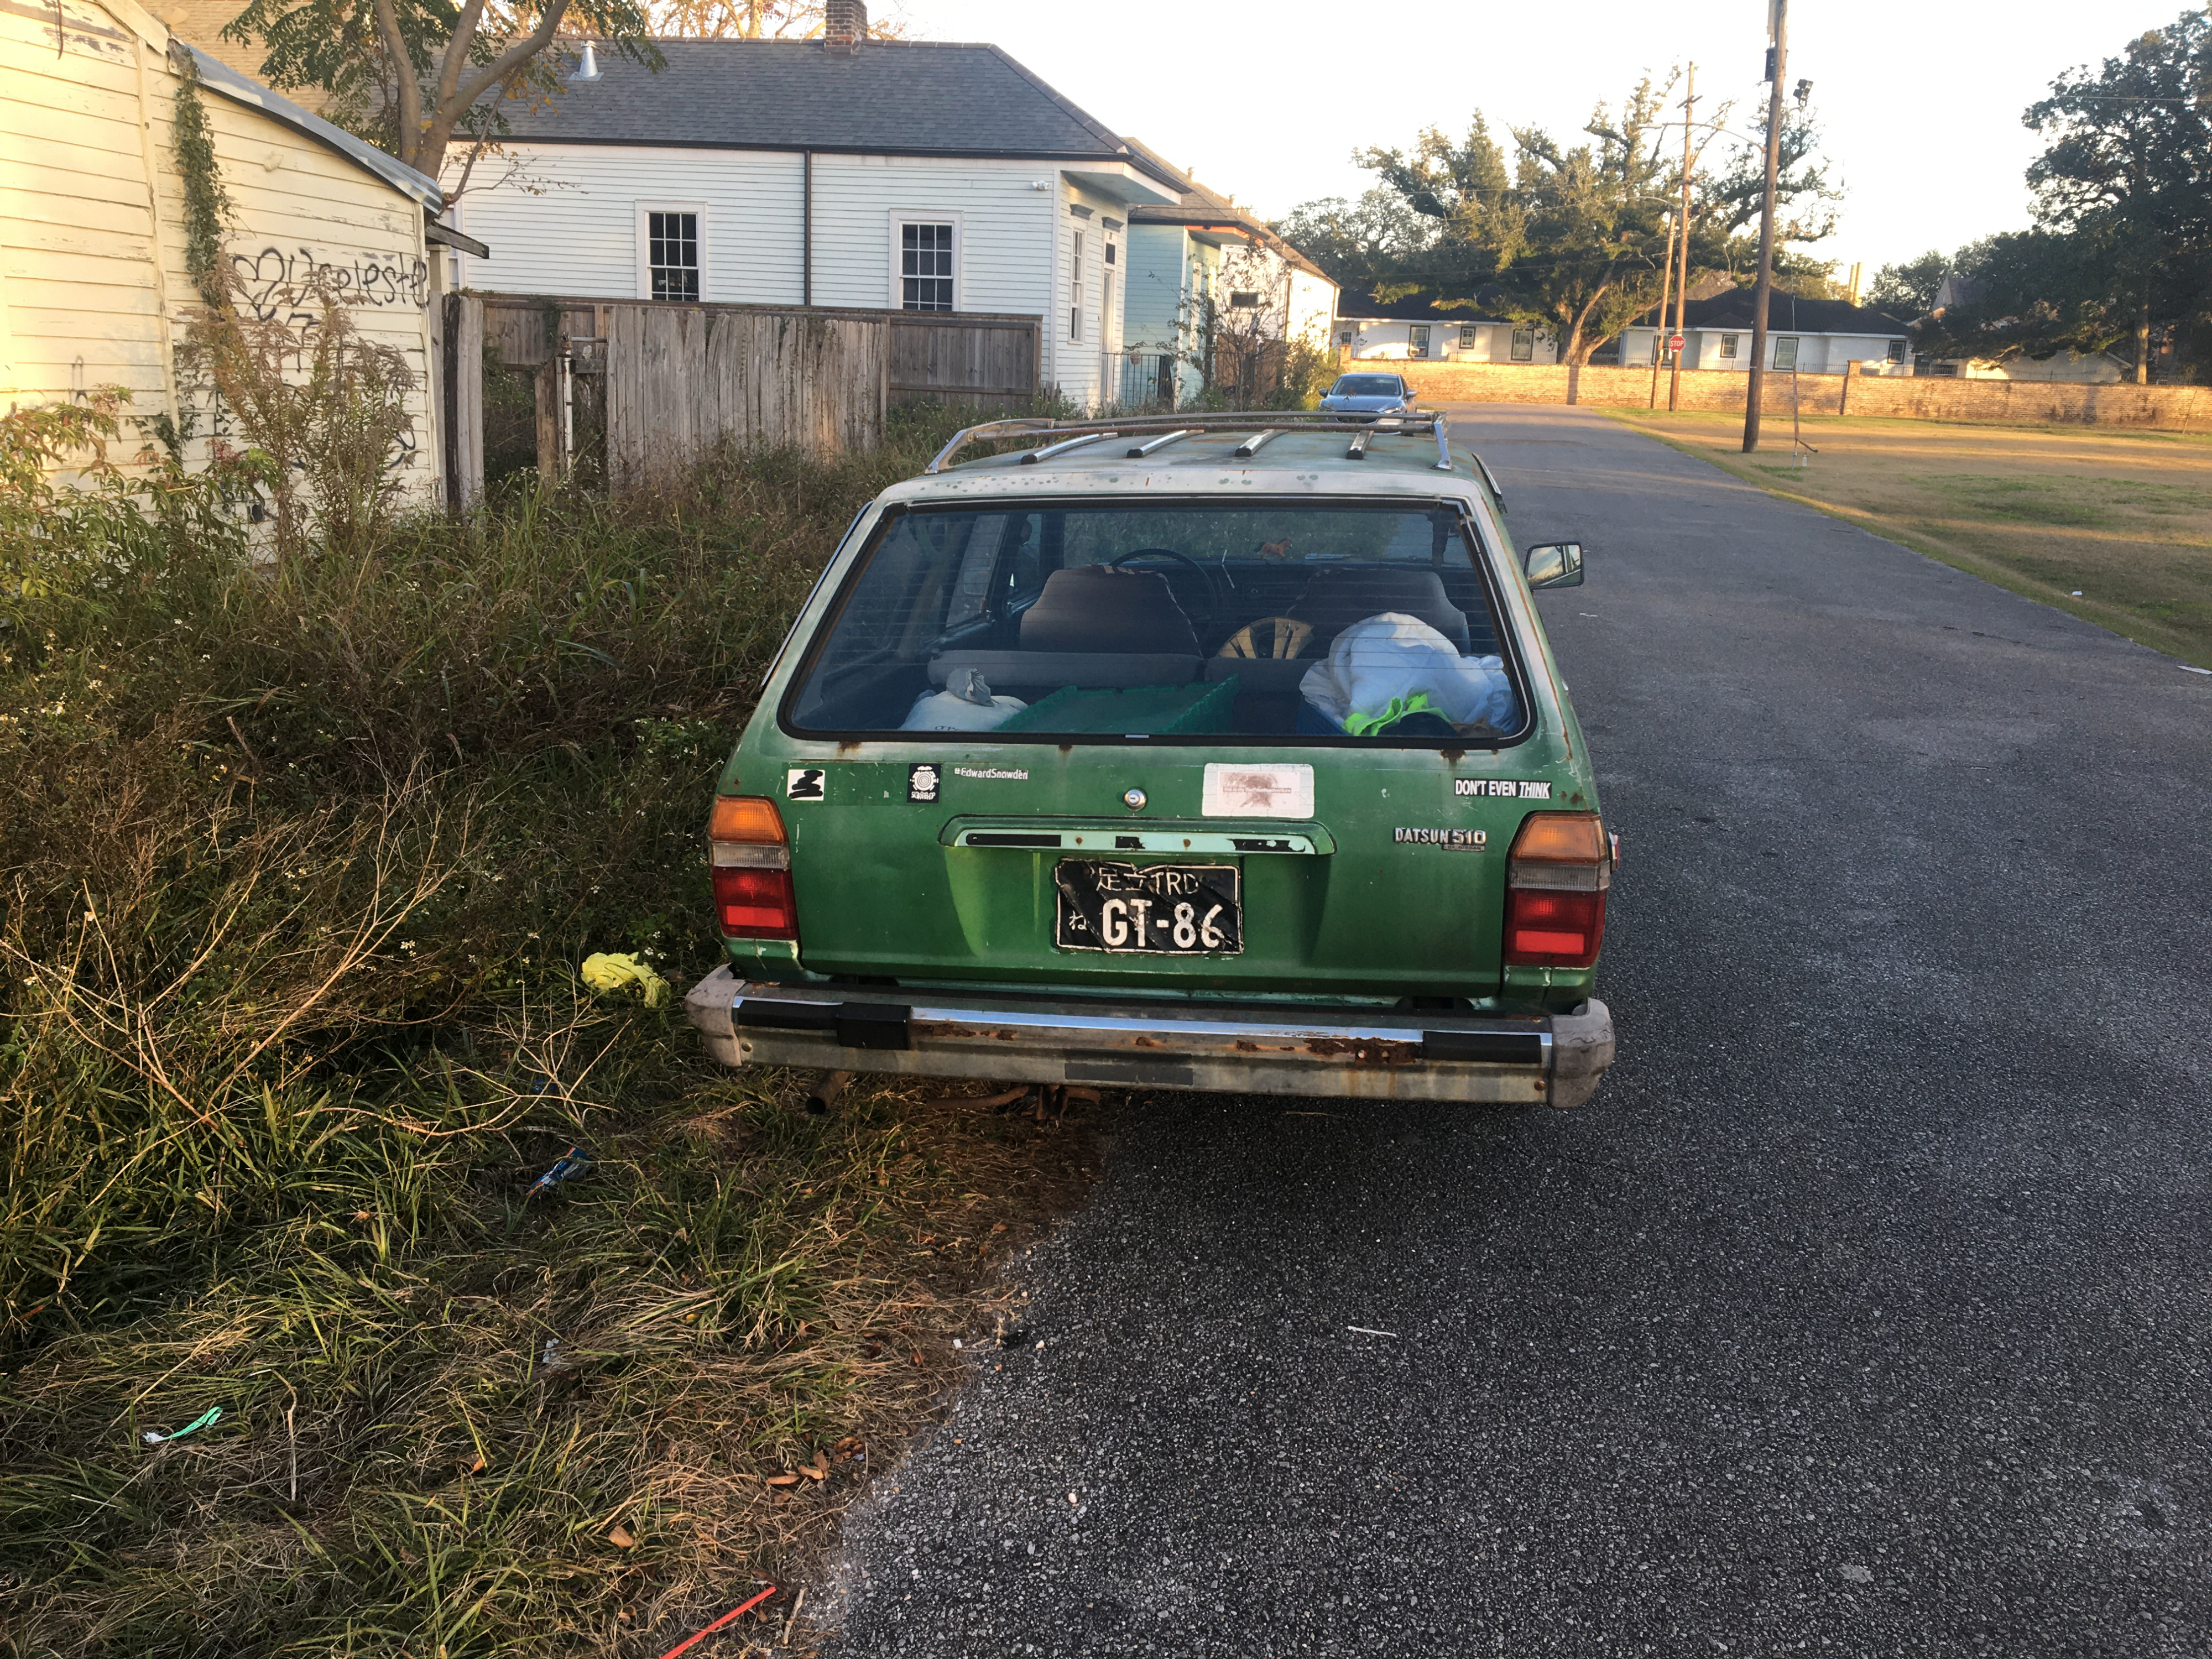 Datsun 510 in New Orleans with Japanese plates